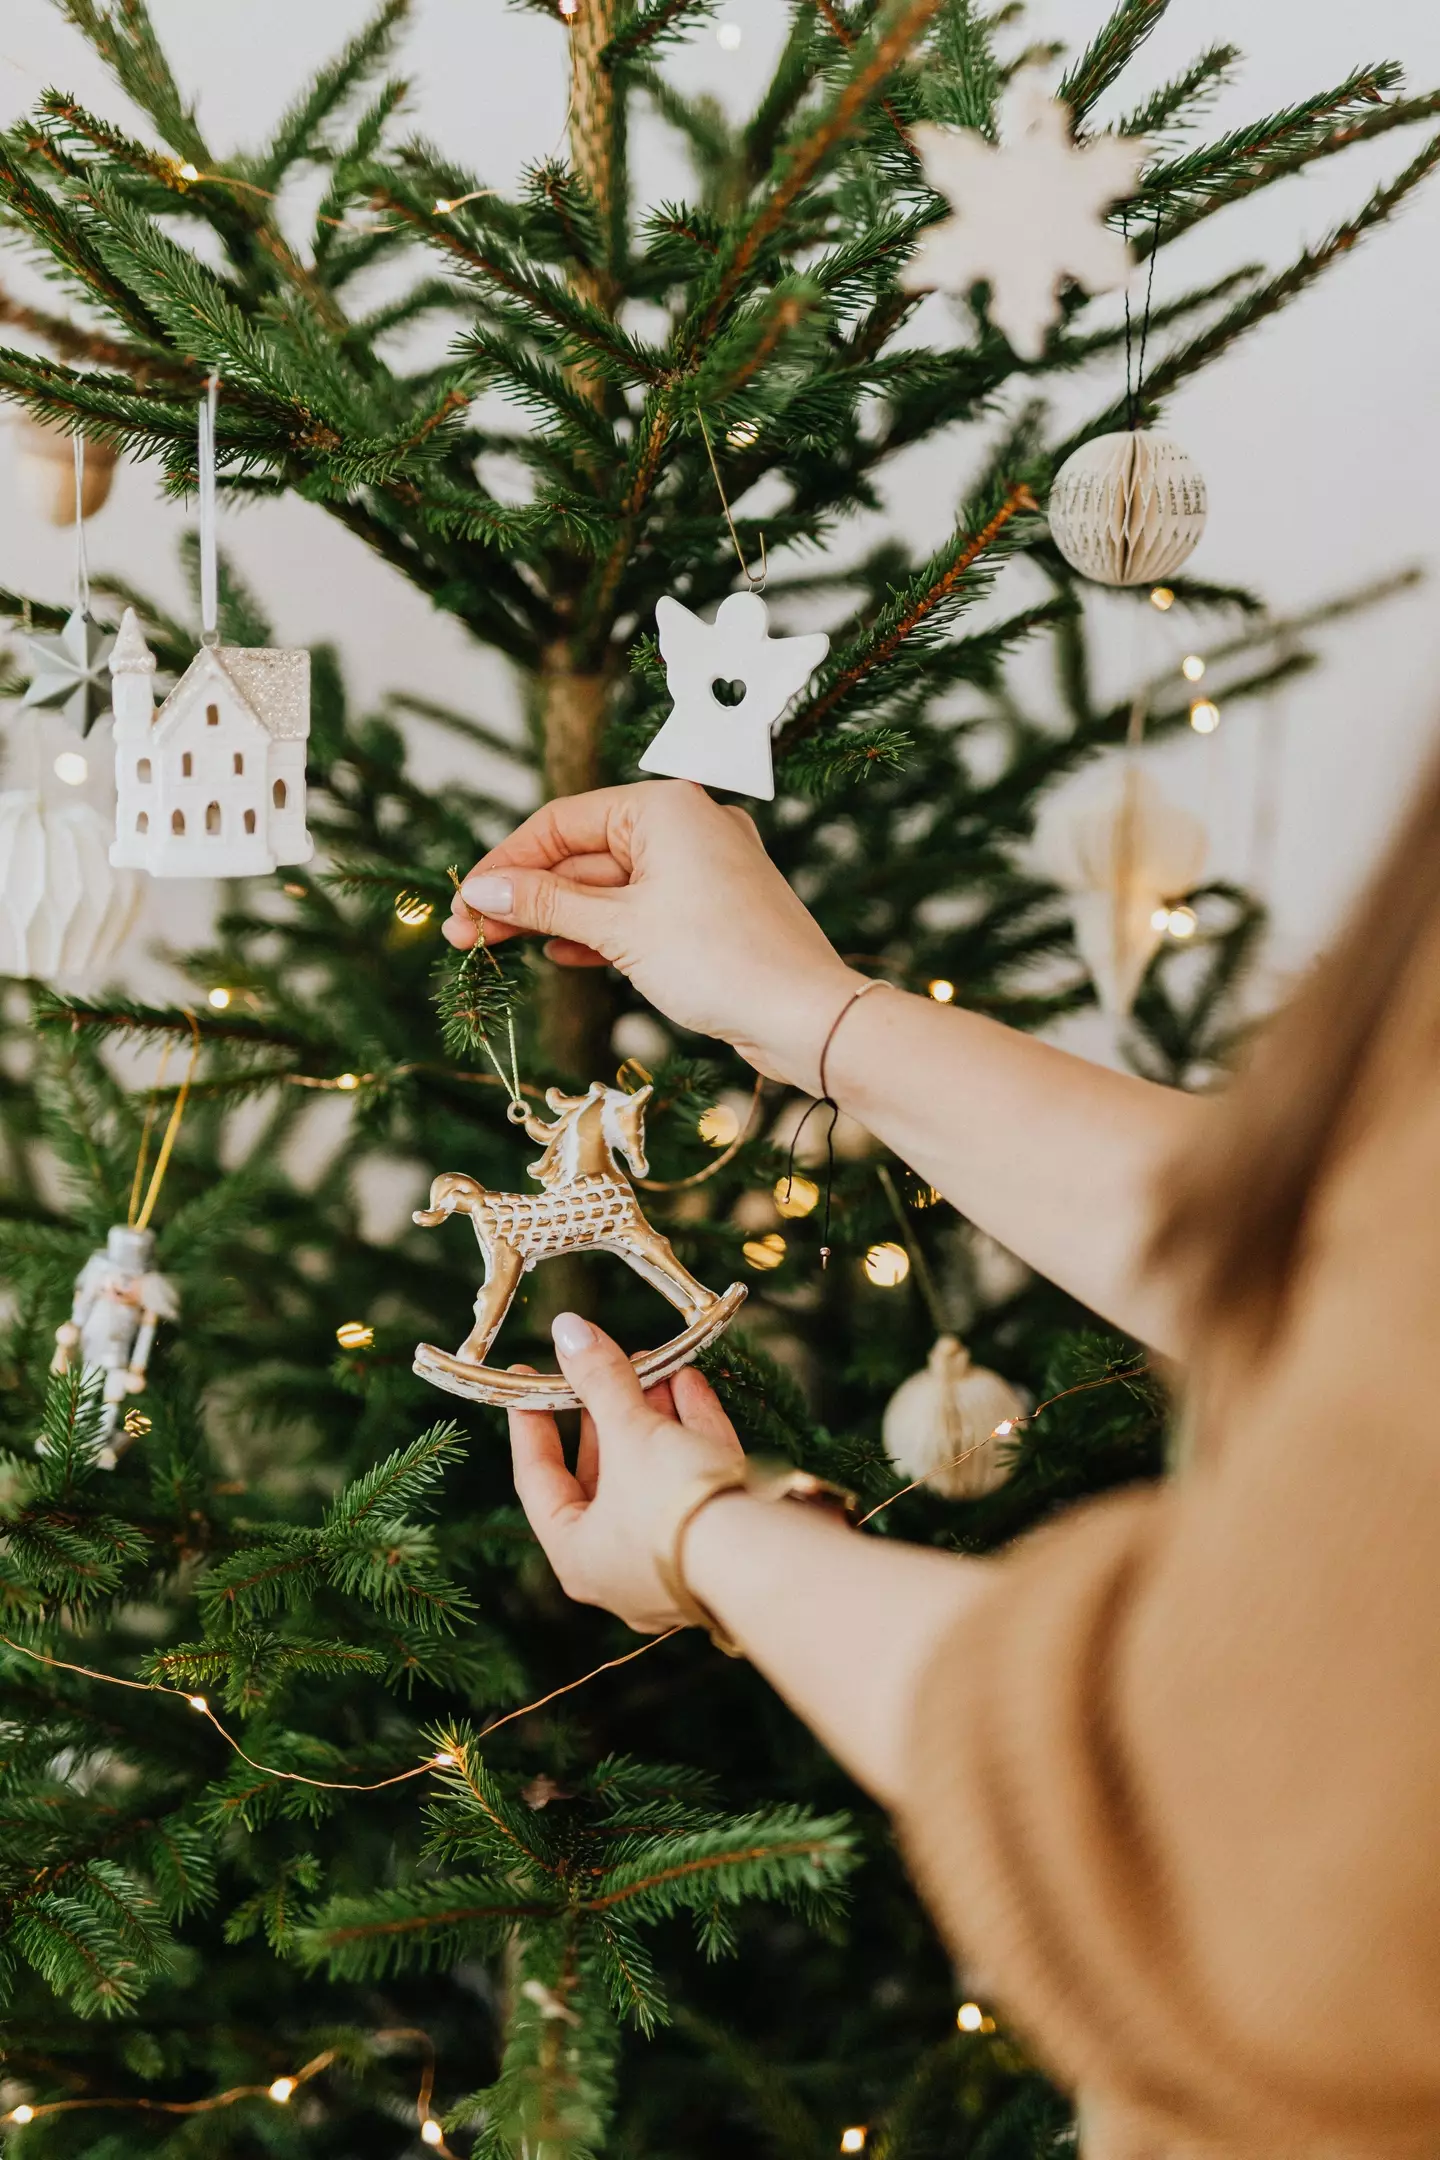 Would you pay someone to decorate your Christmas tree?